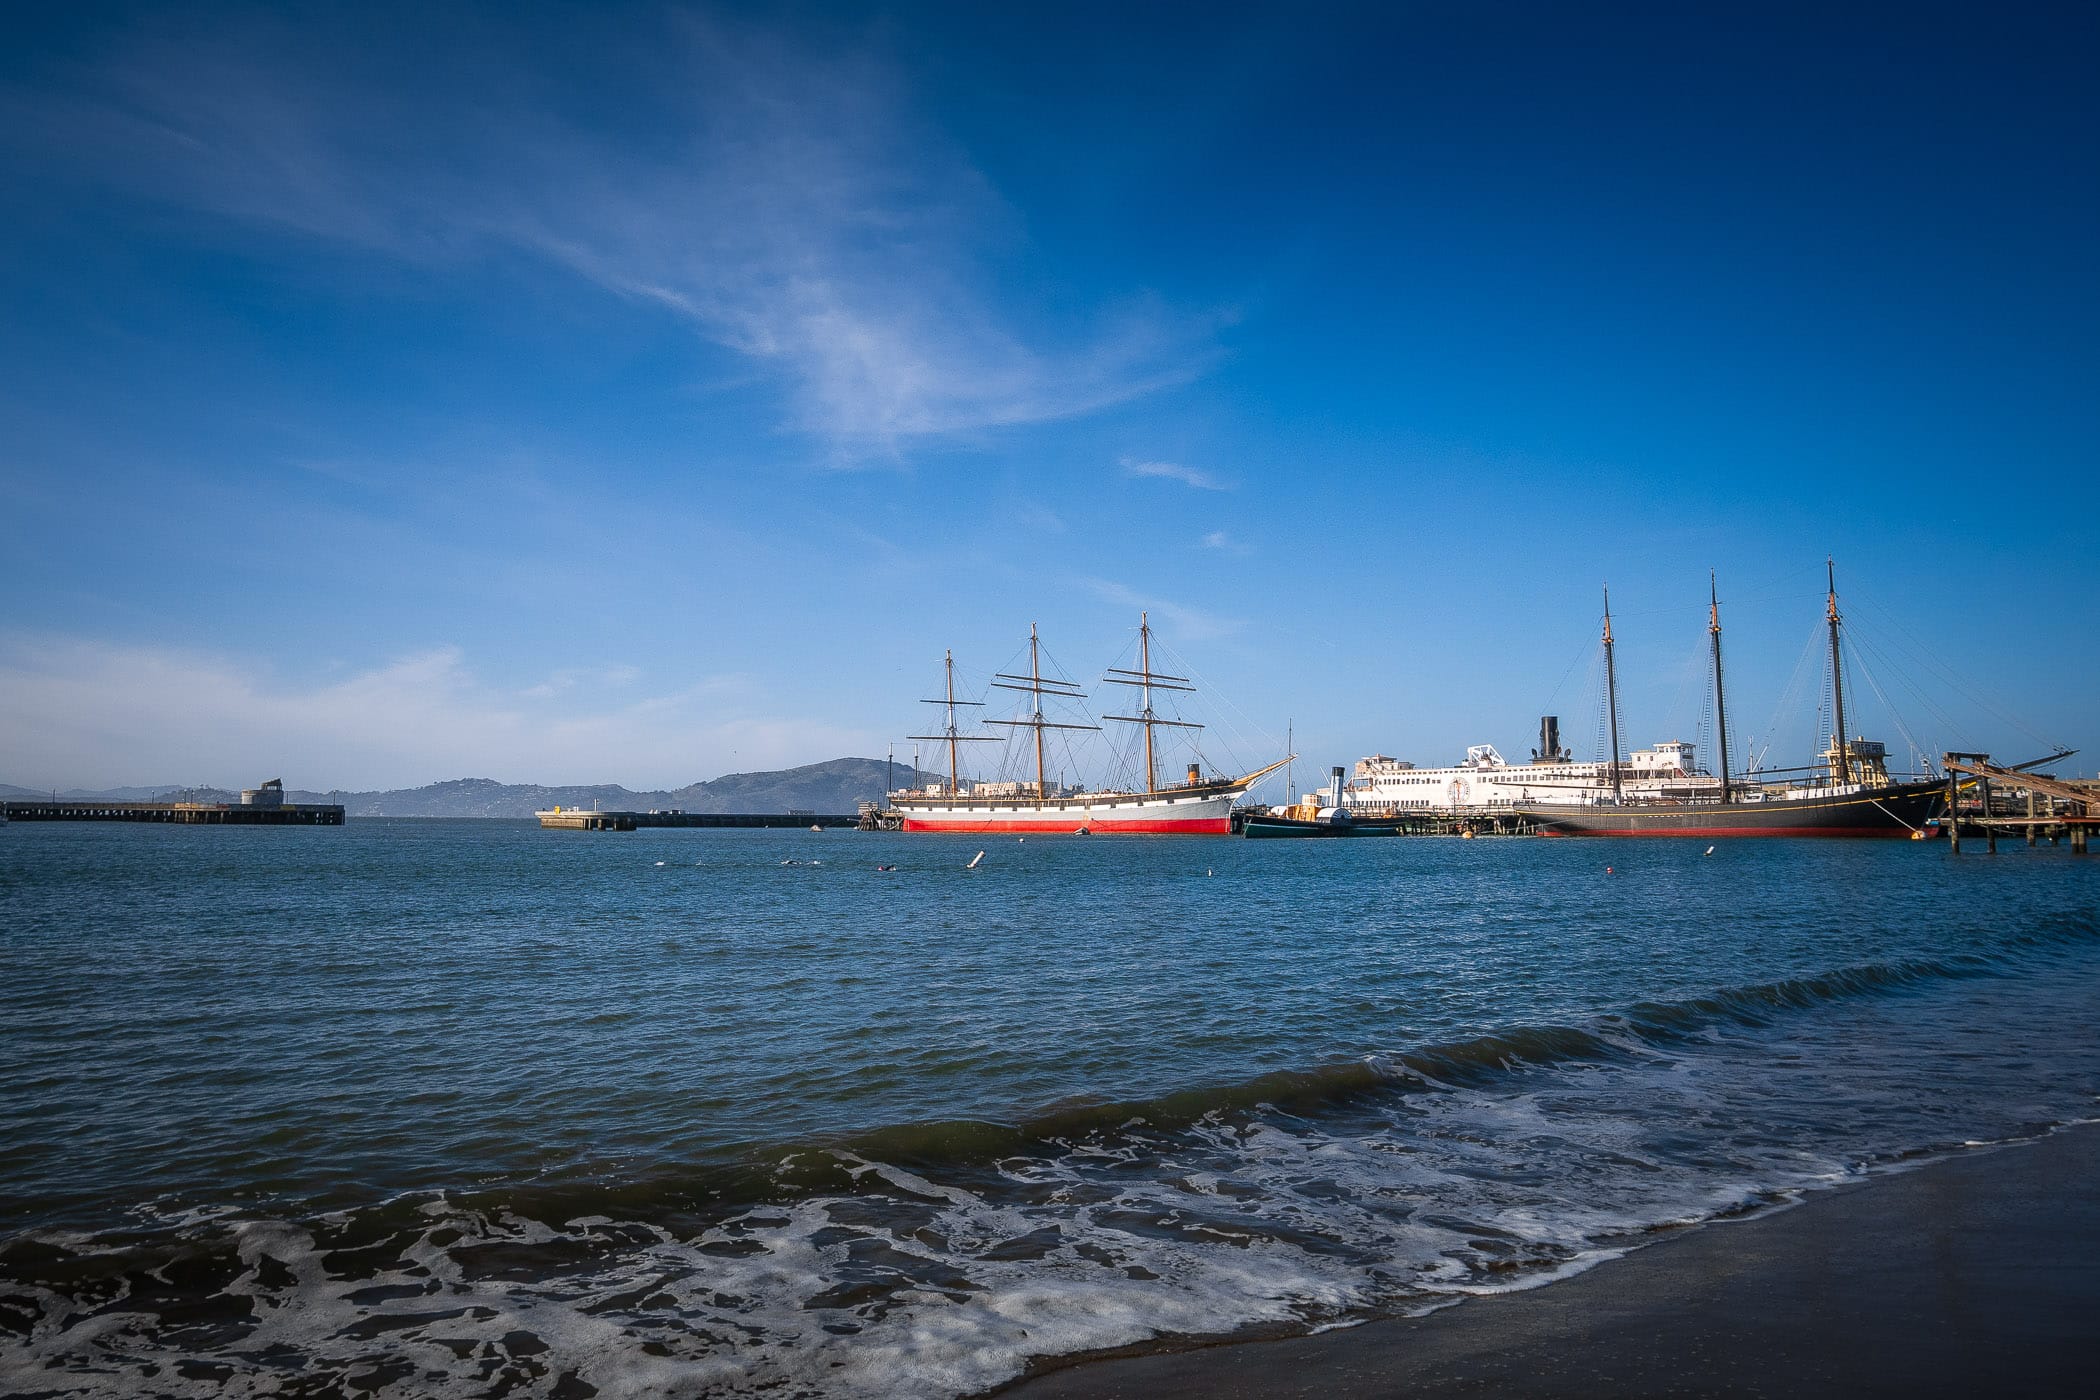 The tall masts of the historic ships Balclutha and C.A. Thayer at the San Francisco Maritime National Historic Park.